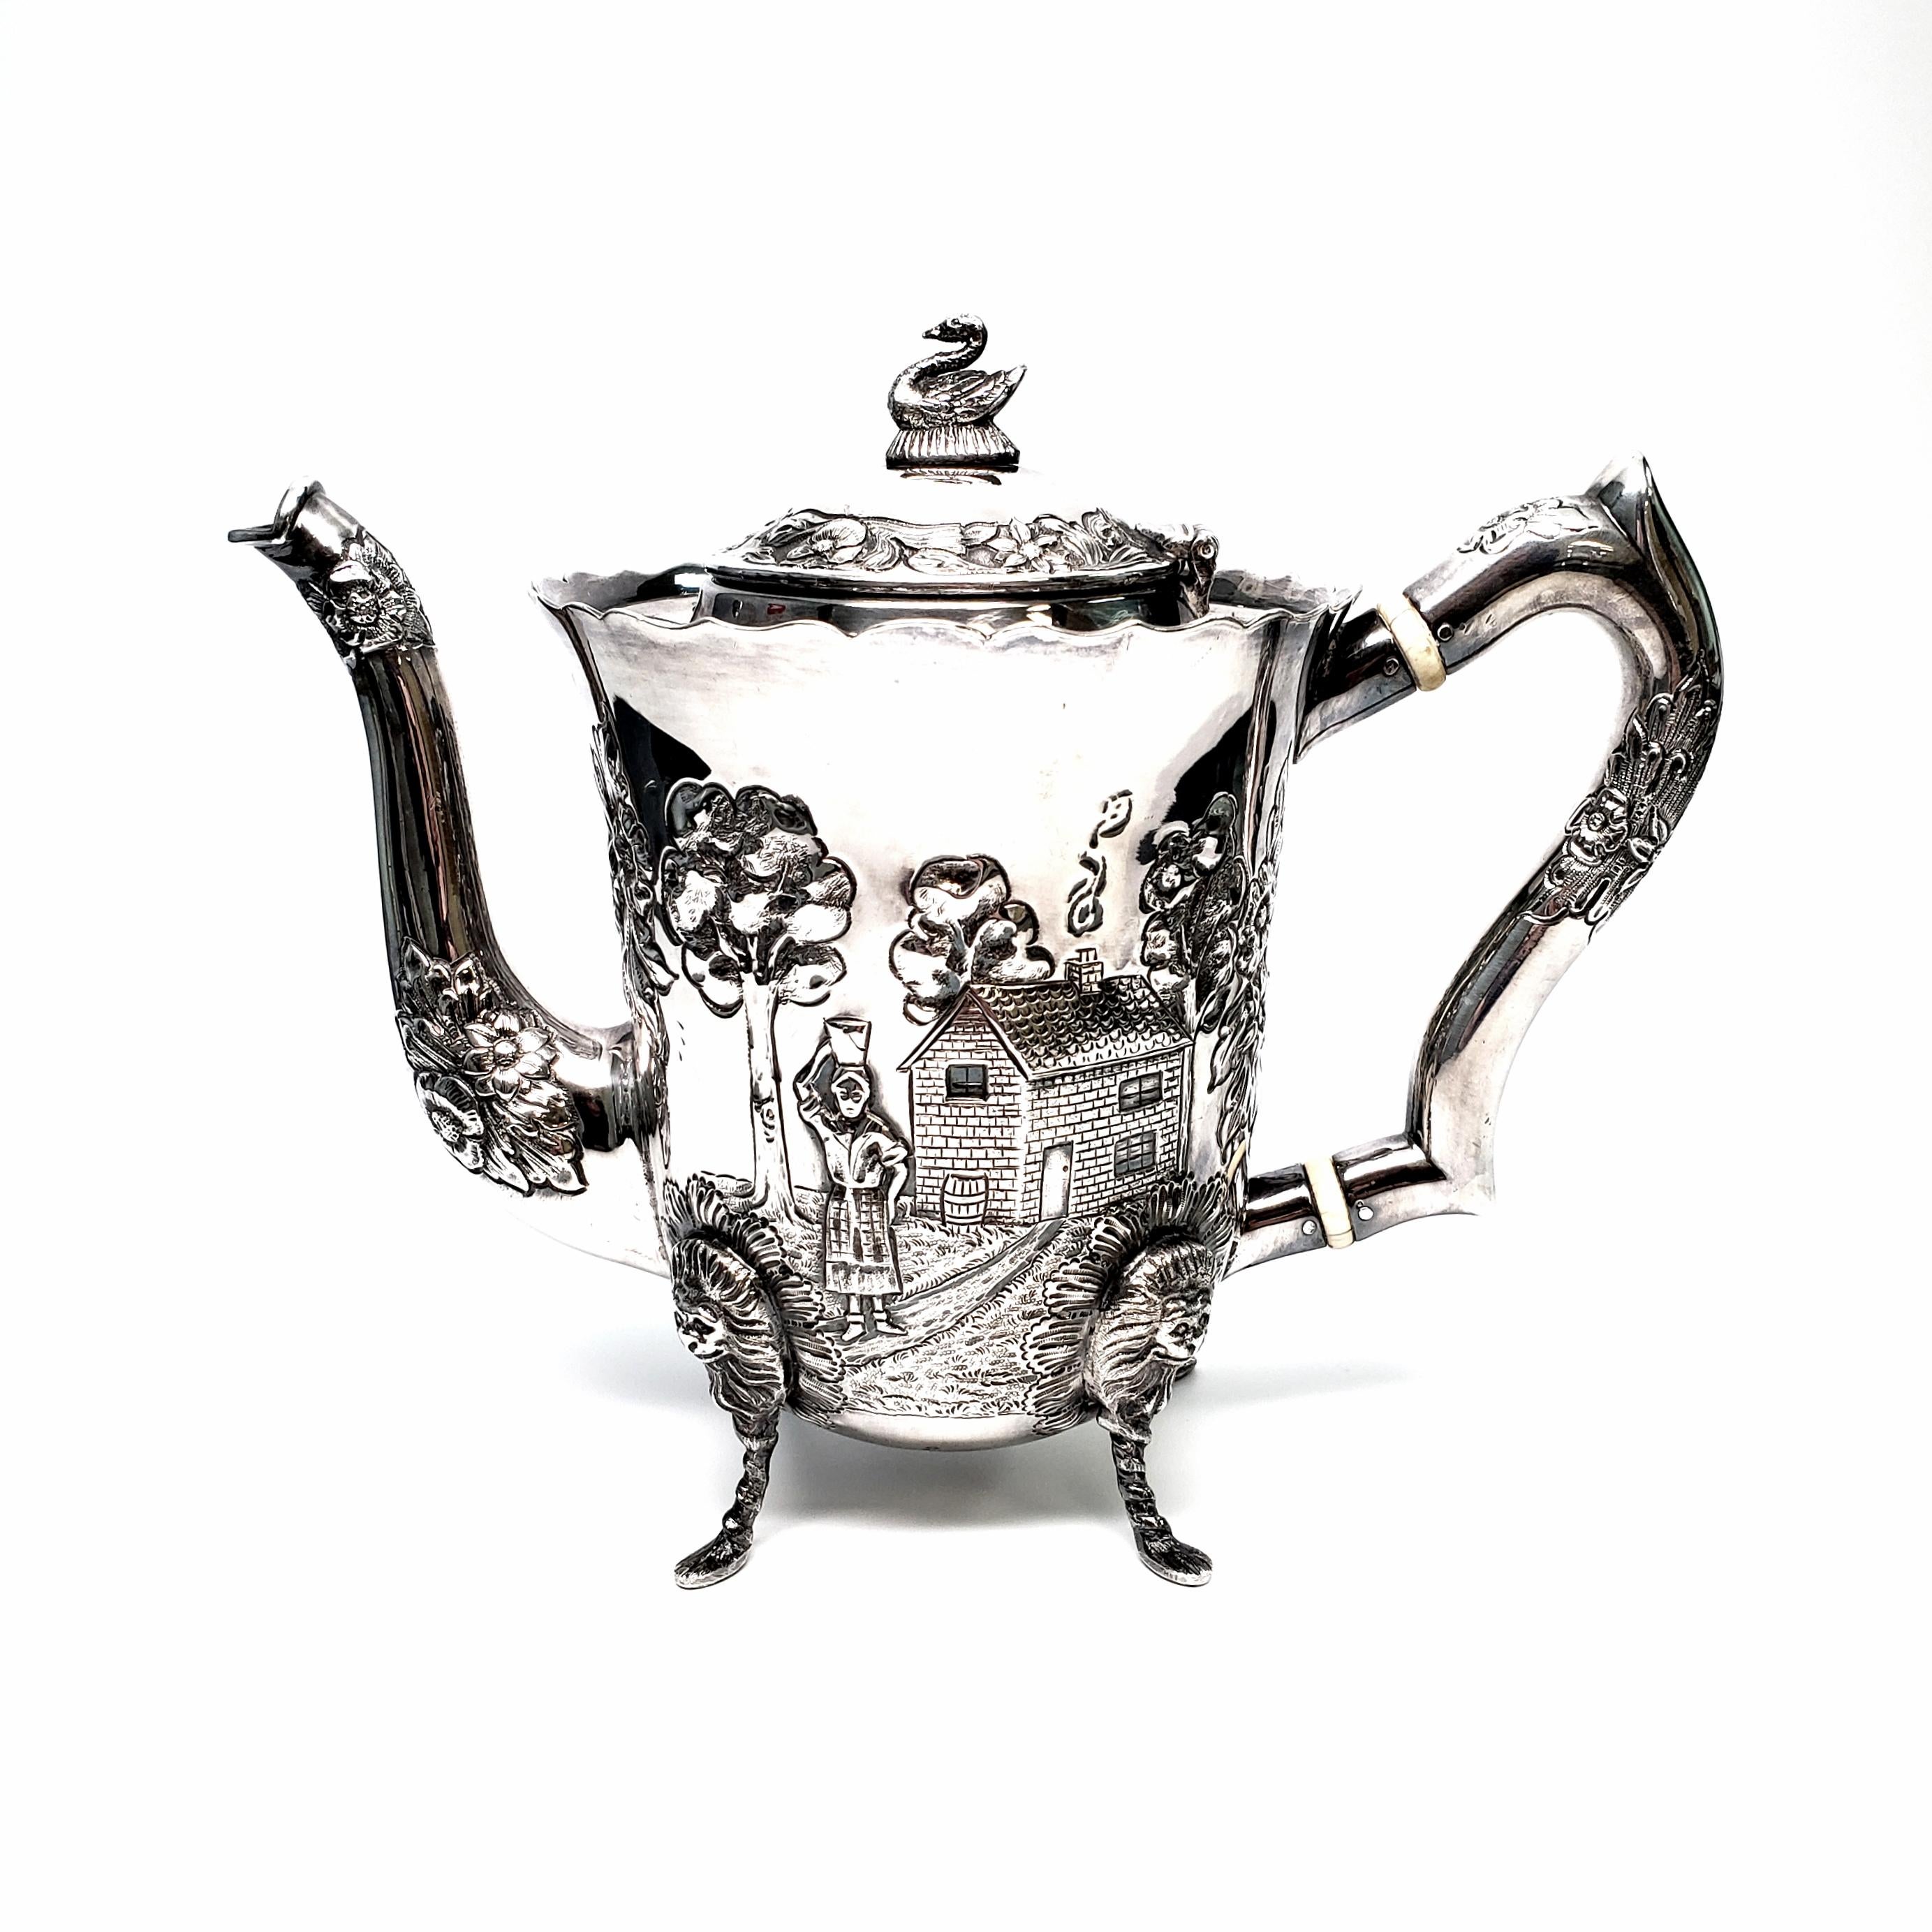 Vintage sterling silver 4 piece coffee and tea set in the Dairymaid pattern from Royal Irish Silver Co, circa 1968.

The 4 pieces of this beautiful set include a tall coffee pot, a shorter tea pot, an open creamer and a sugar bowl. The chased and